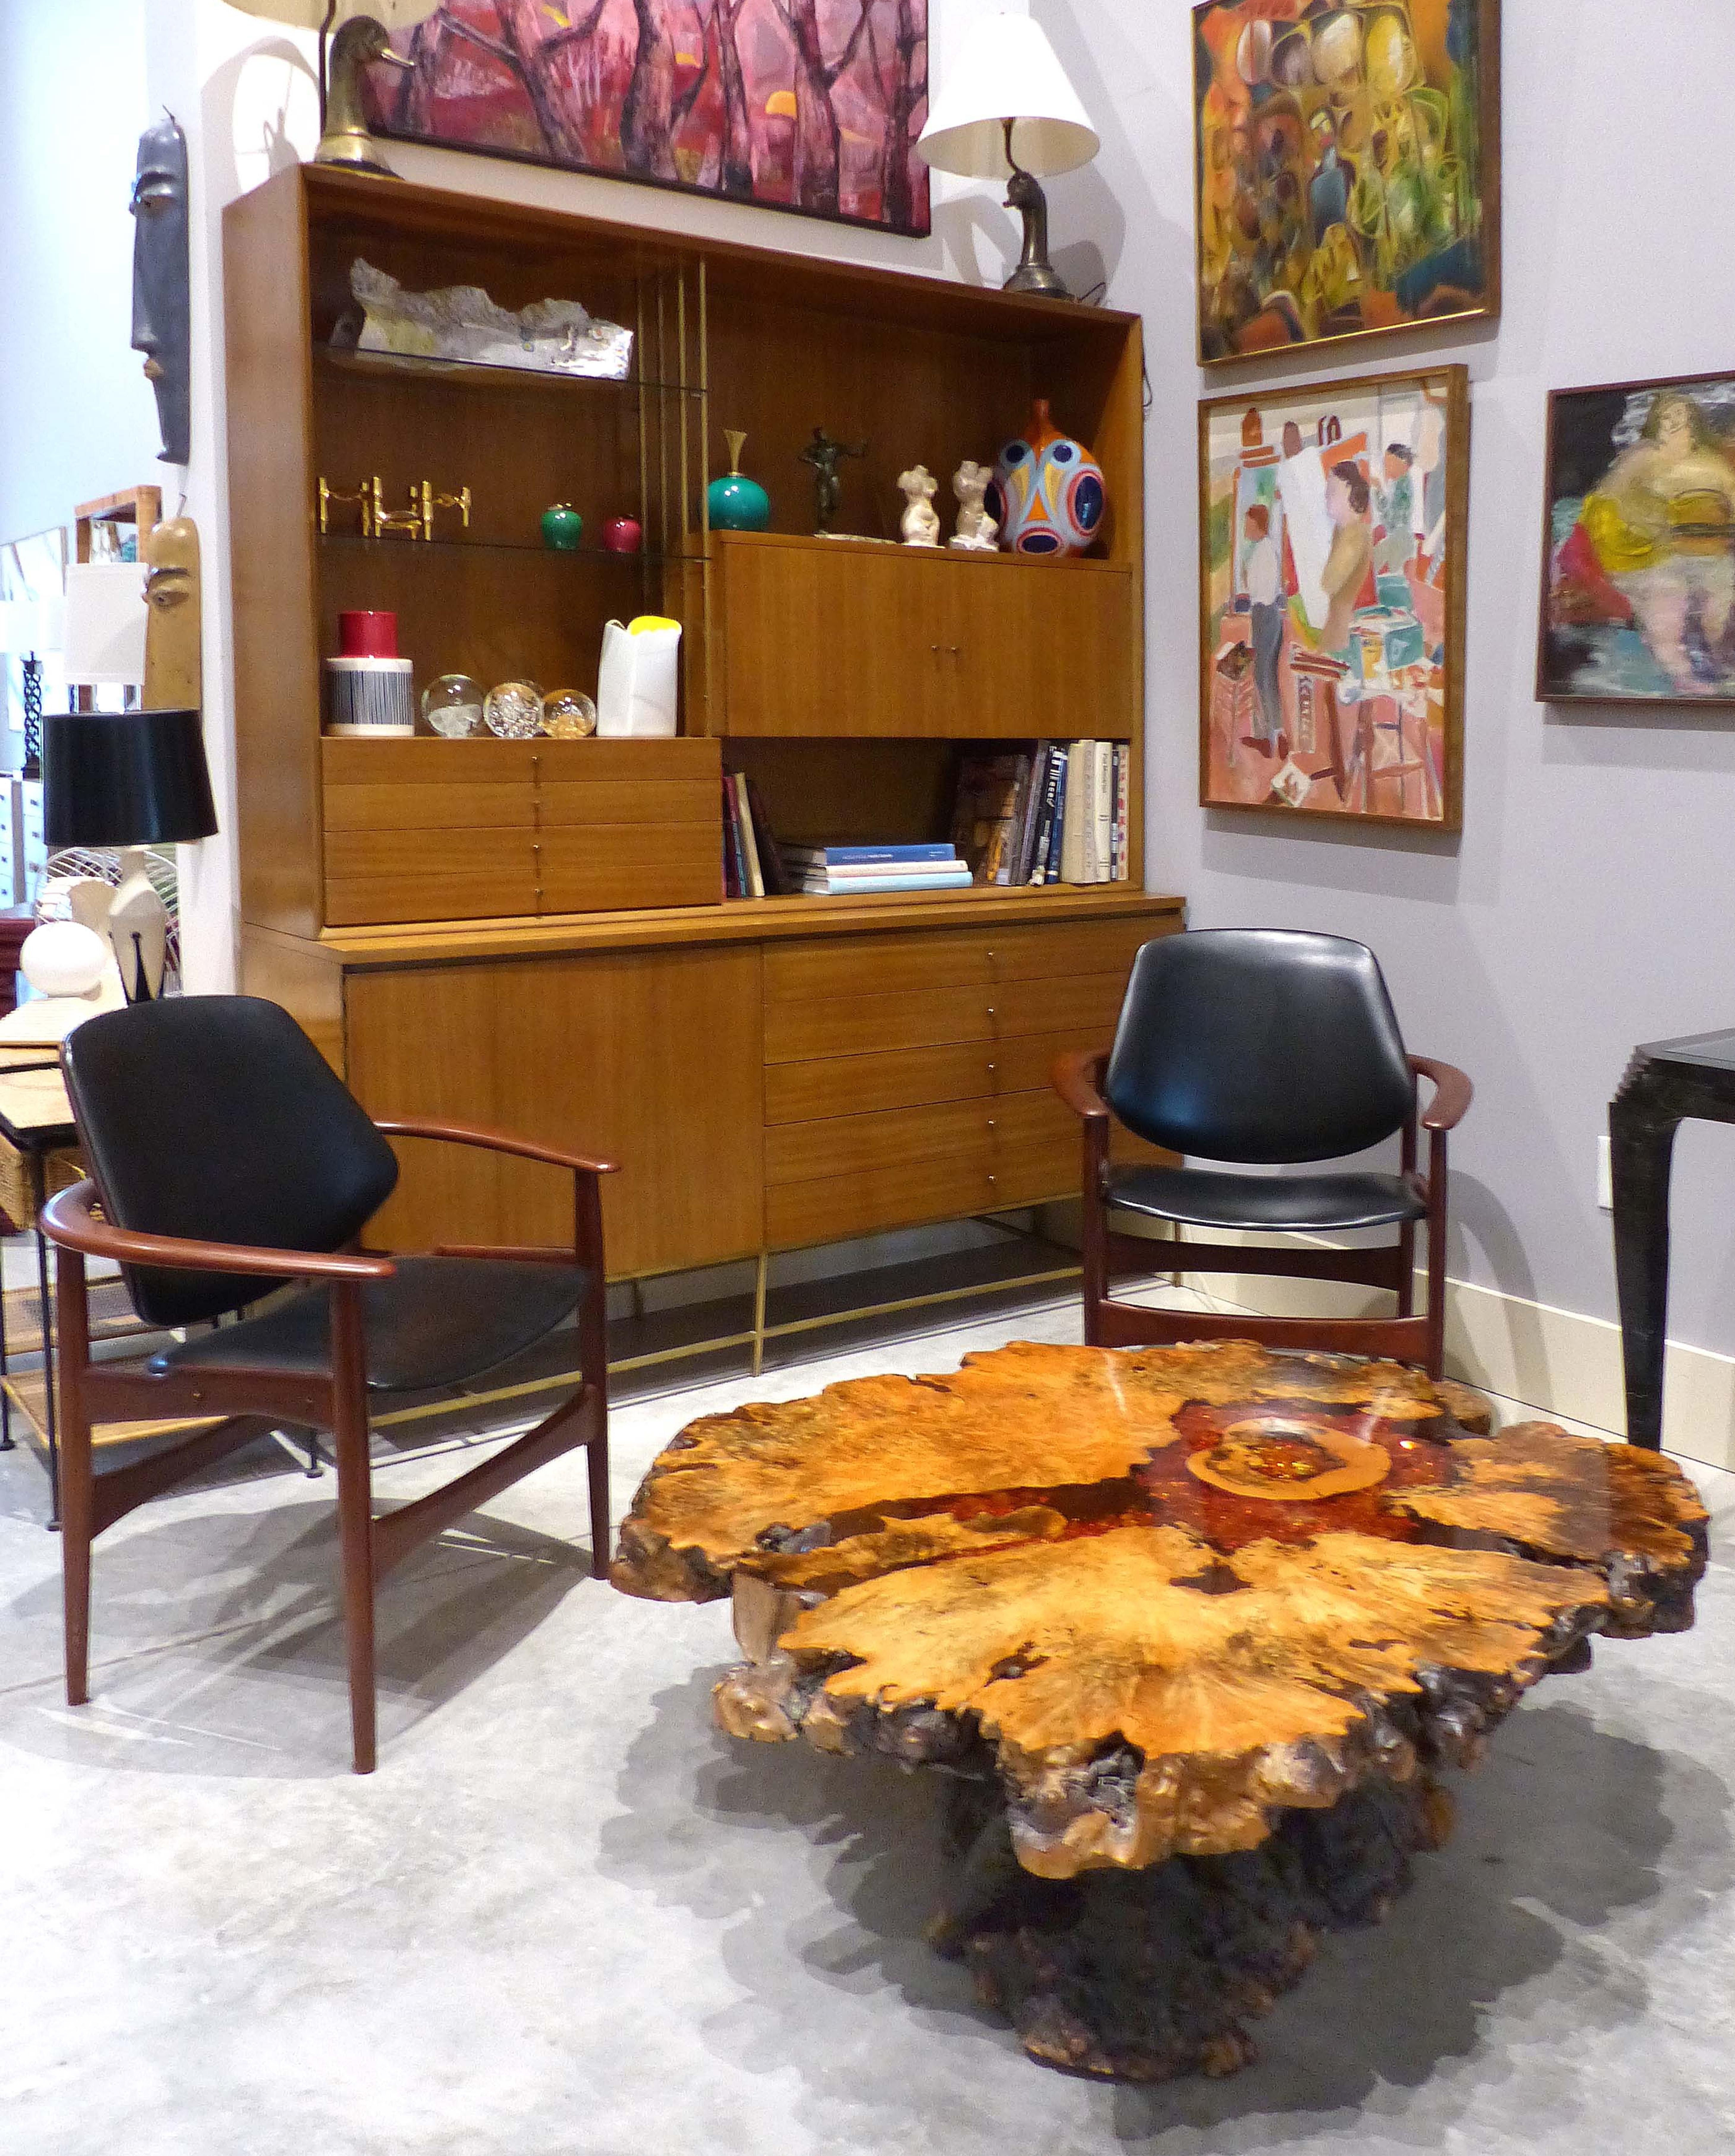 1970s California Studio Burl Wood Live Edge Slab Coffee Table, the Burl Wood Co.

Offered for sale is a circa 1970s sculptural California studio burlwood live edge slab coffee table. This organic slab top is embedded with sparkling citrine crystal